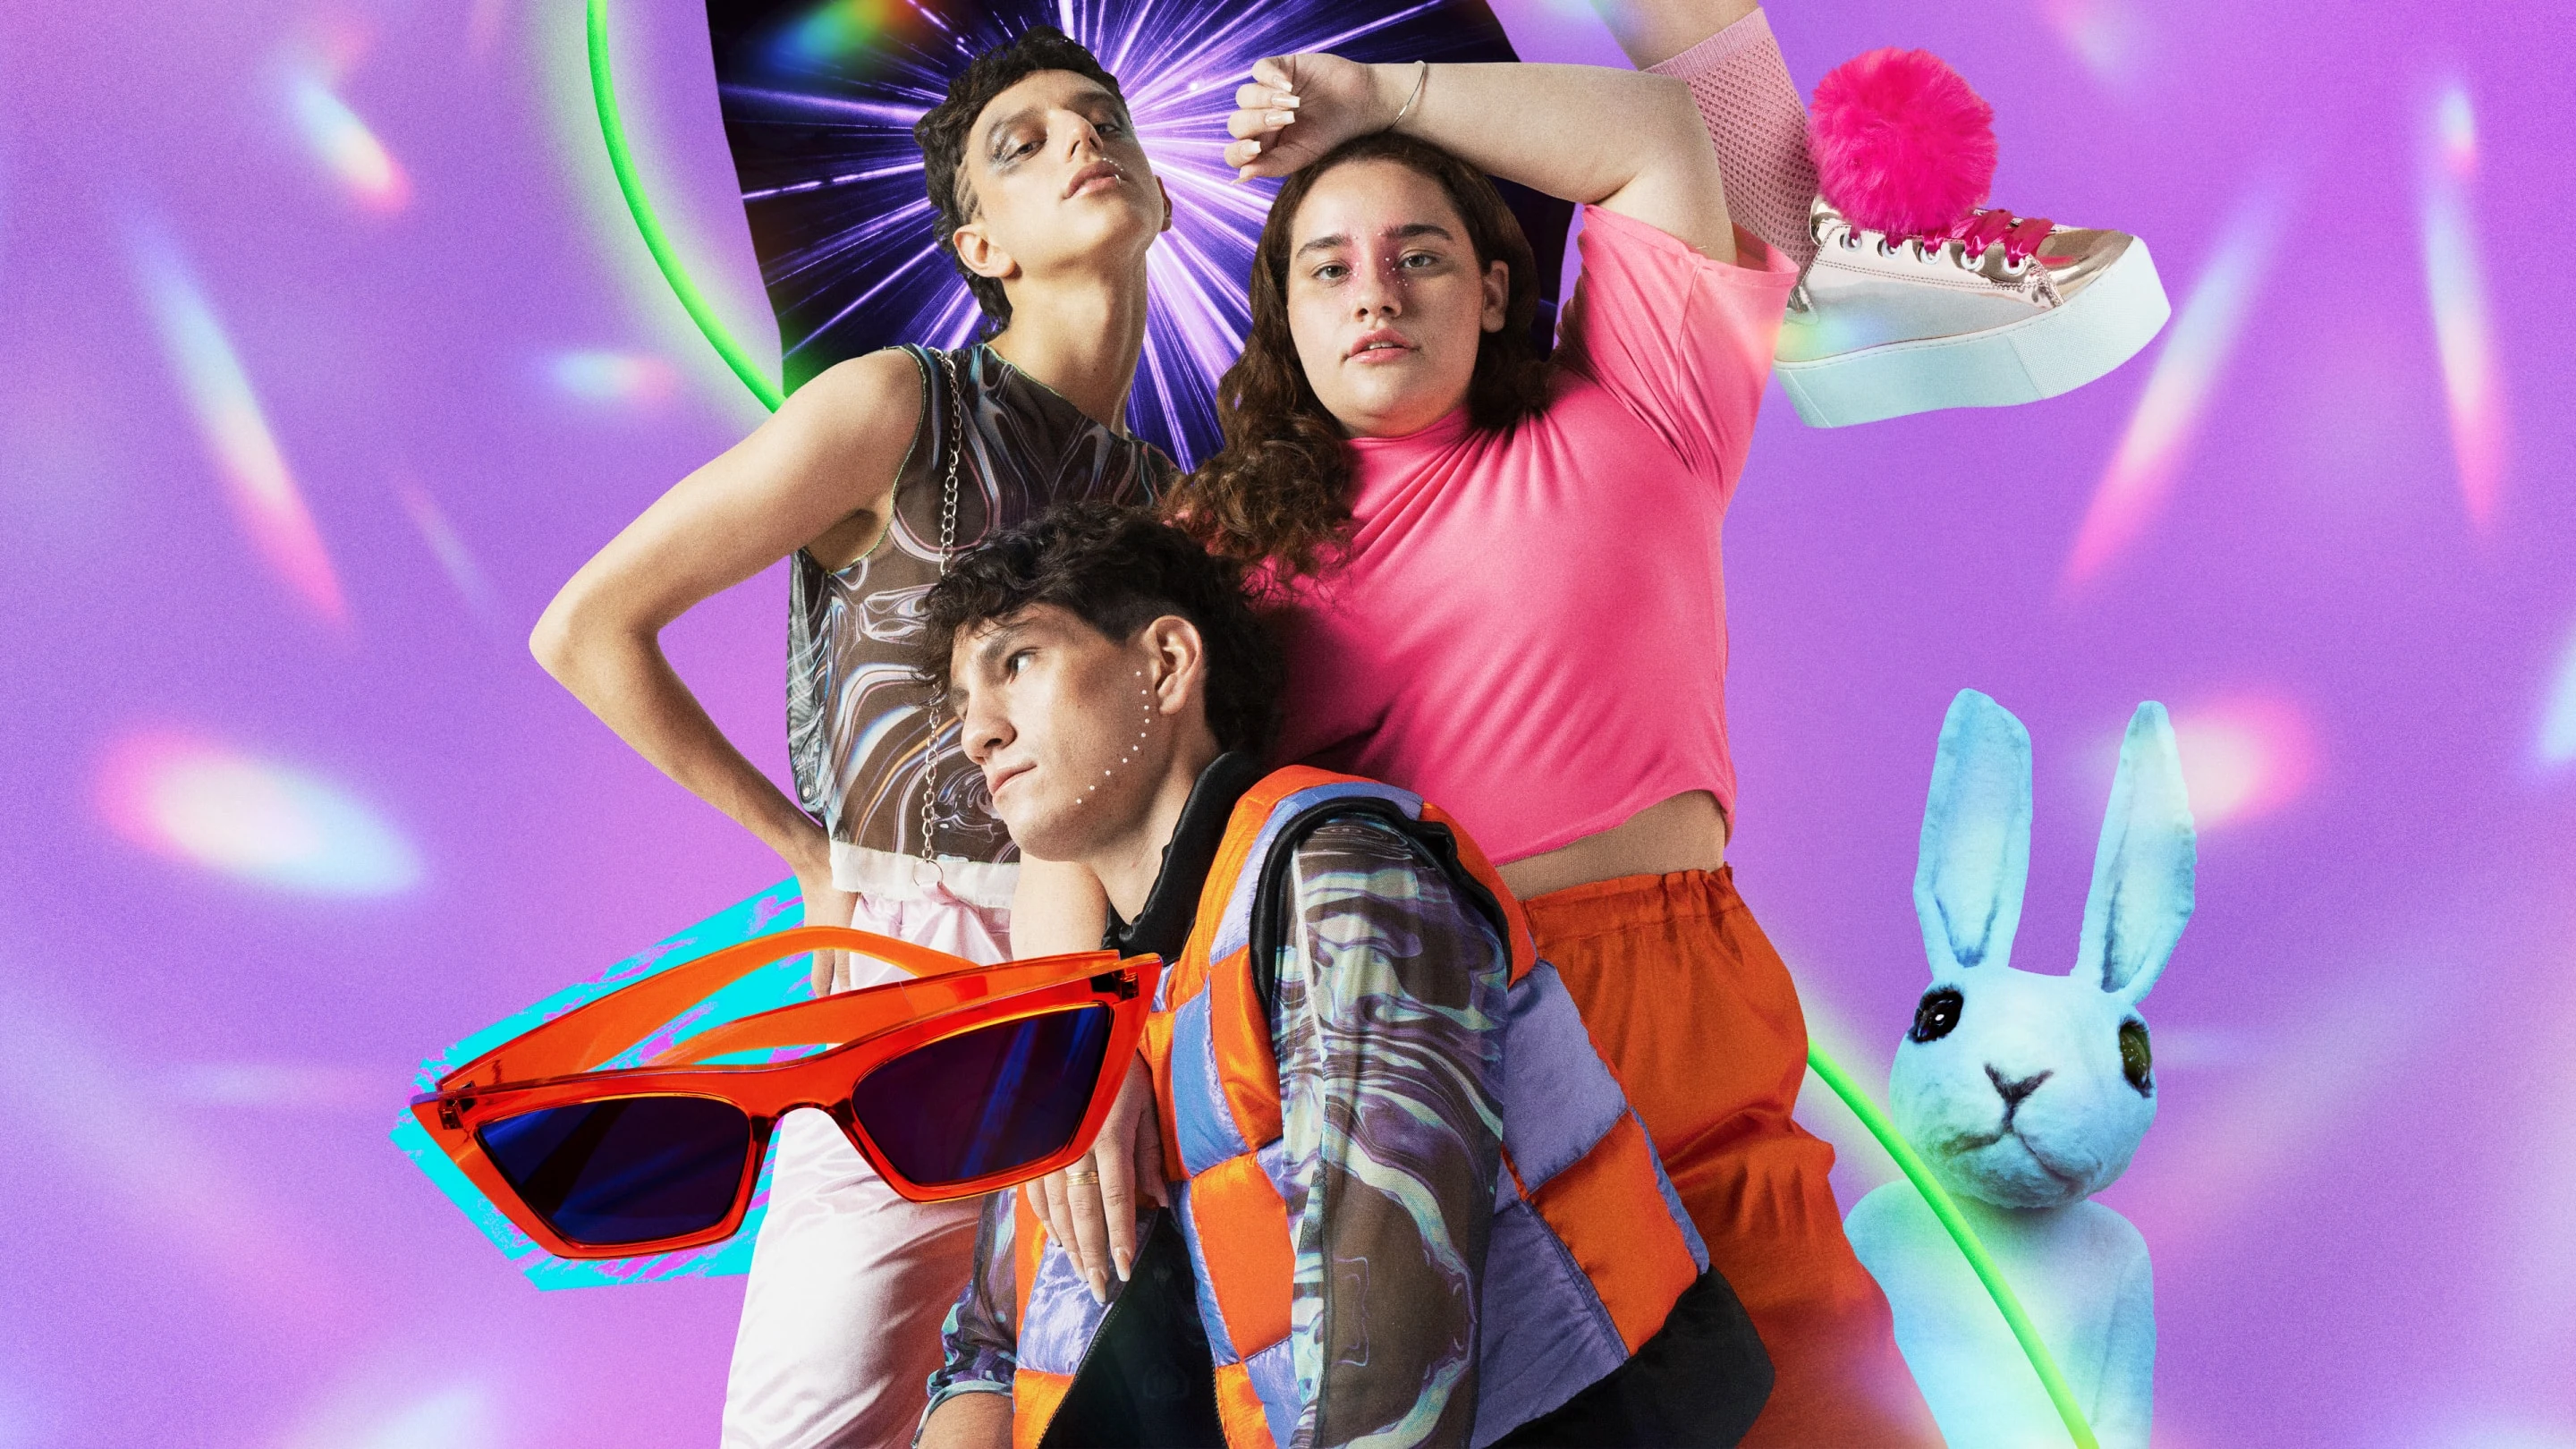 Collage featuring three people of different ethnic and gender identities posing in bright clothing, surrounded by rave-inspired items. 